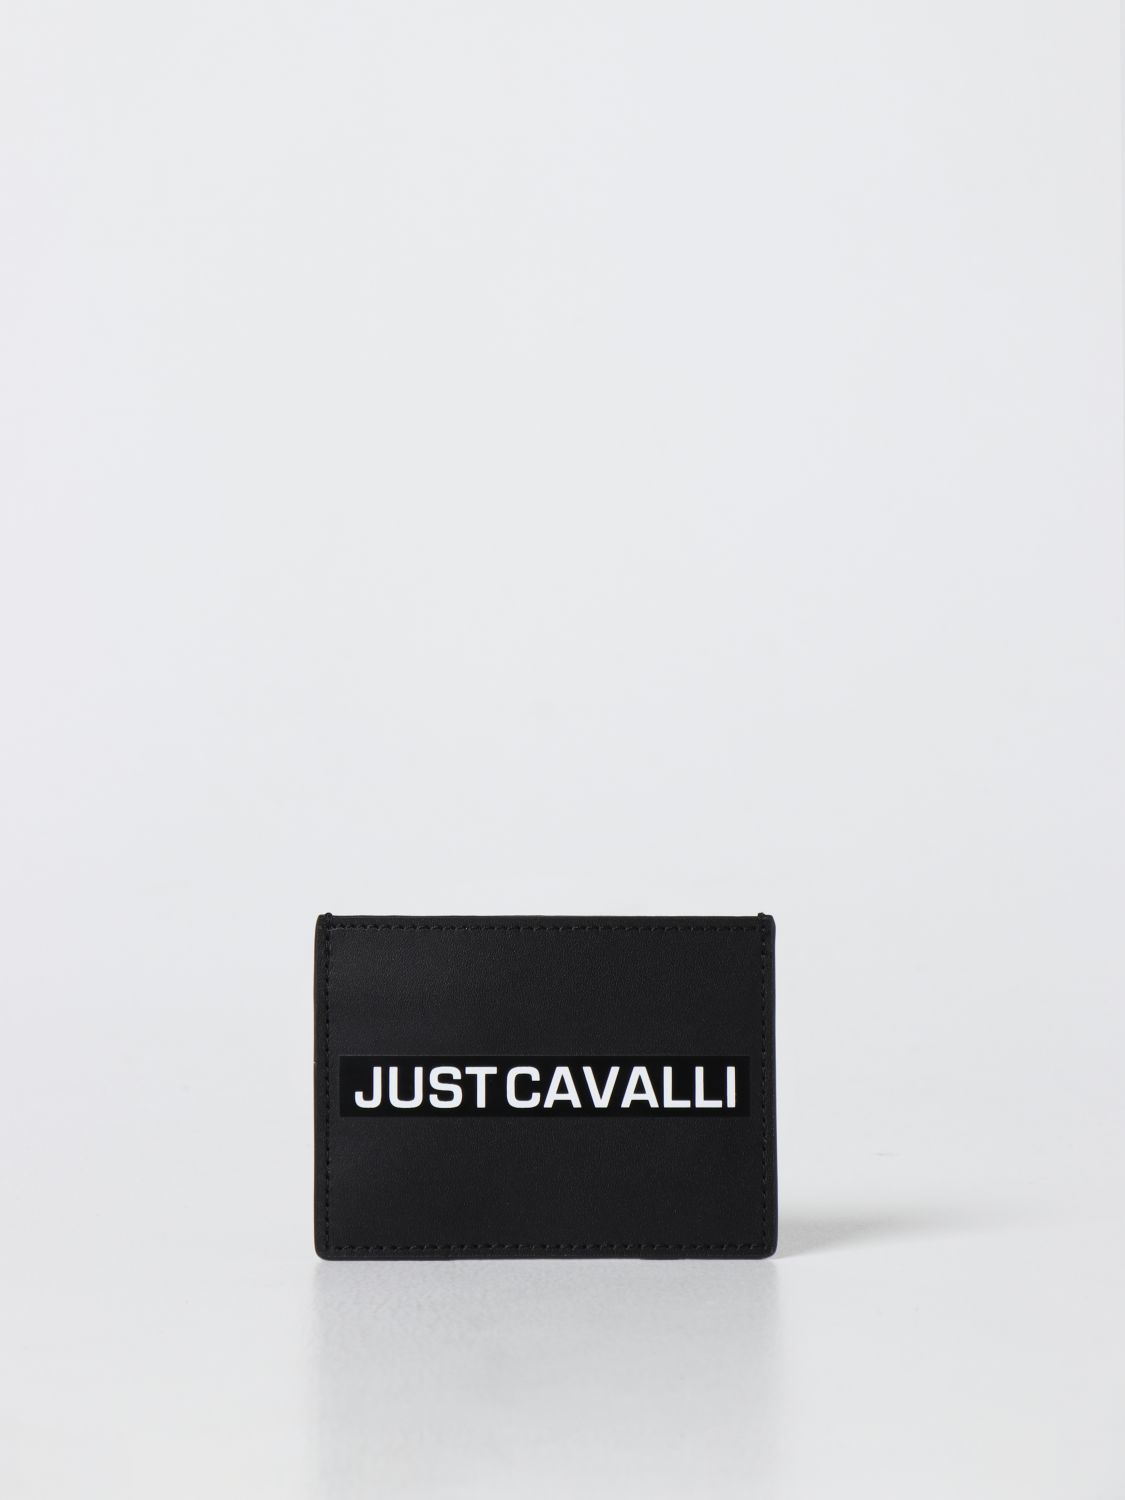 JUST CAVALLI CREDIT CARD HOLDER IN SMOOTH LEATHER,C82099002